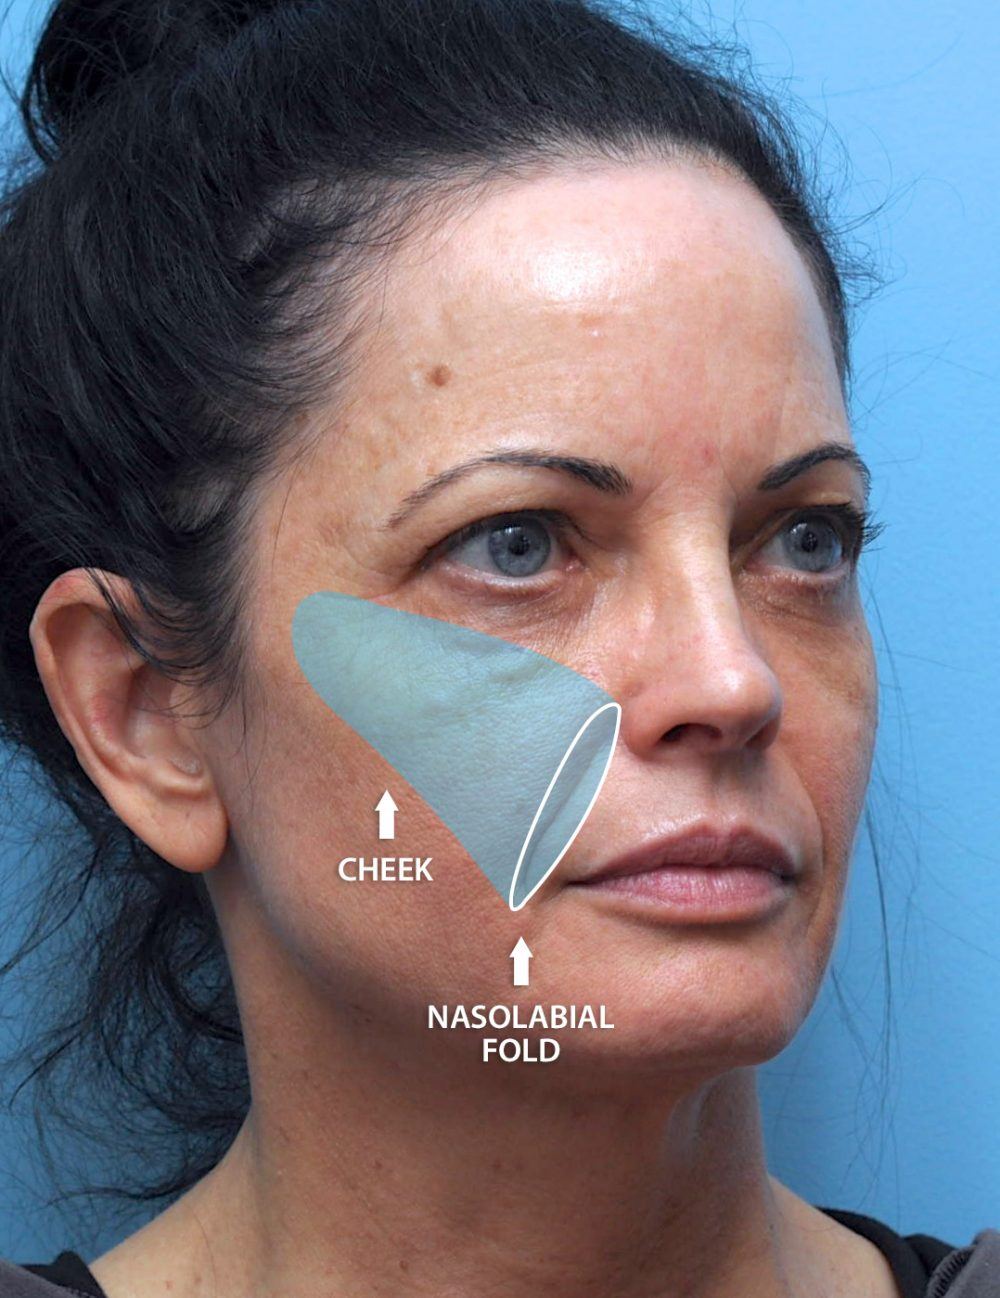 Diagram showing the nasolabial folds on a woman